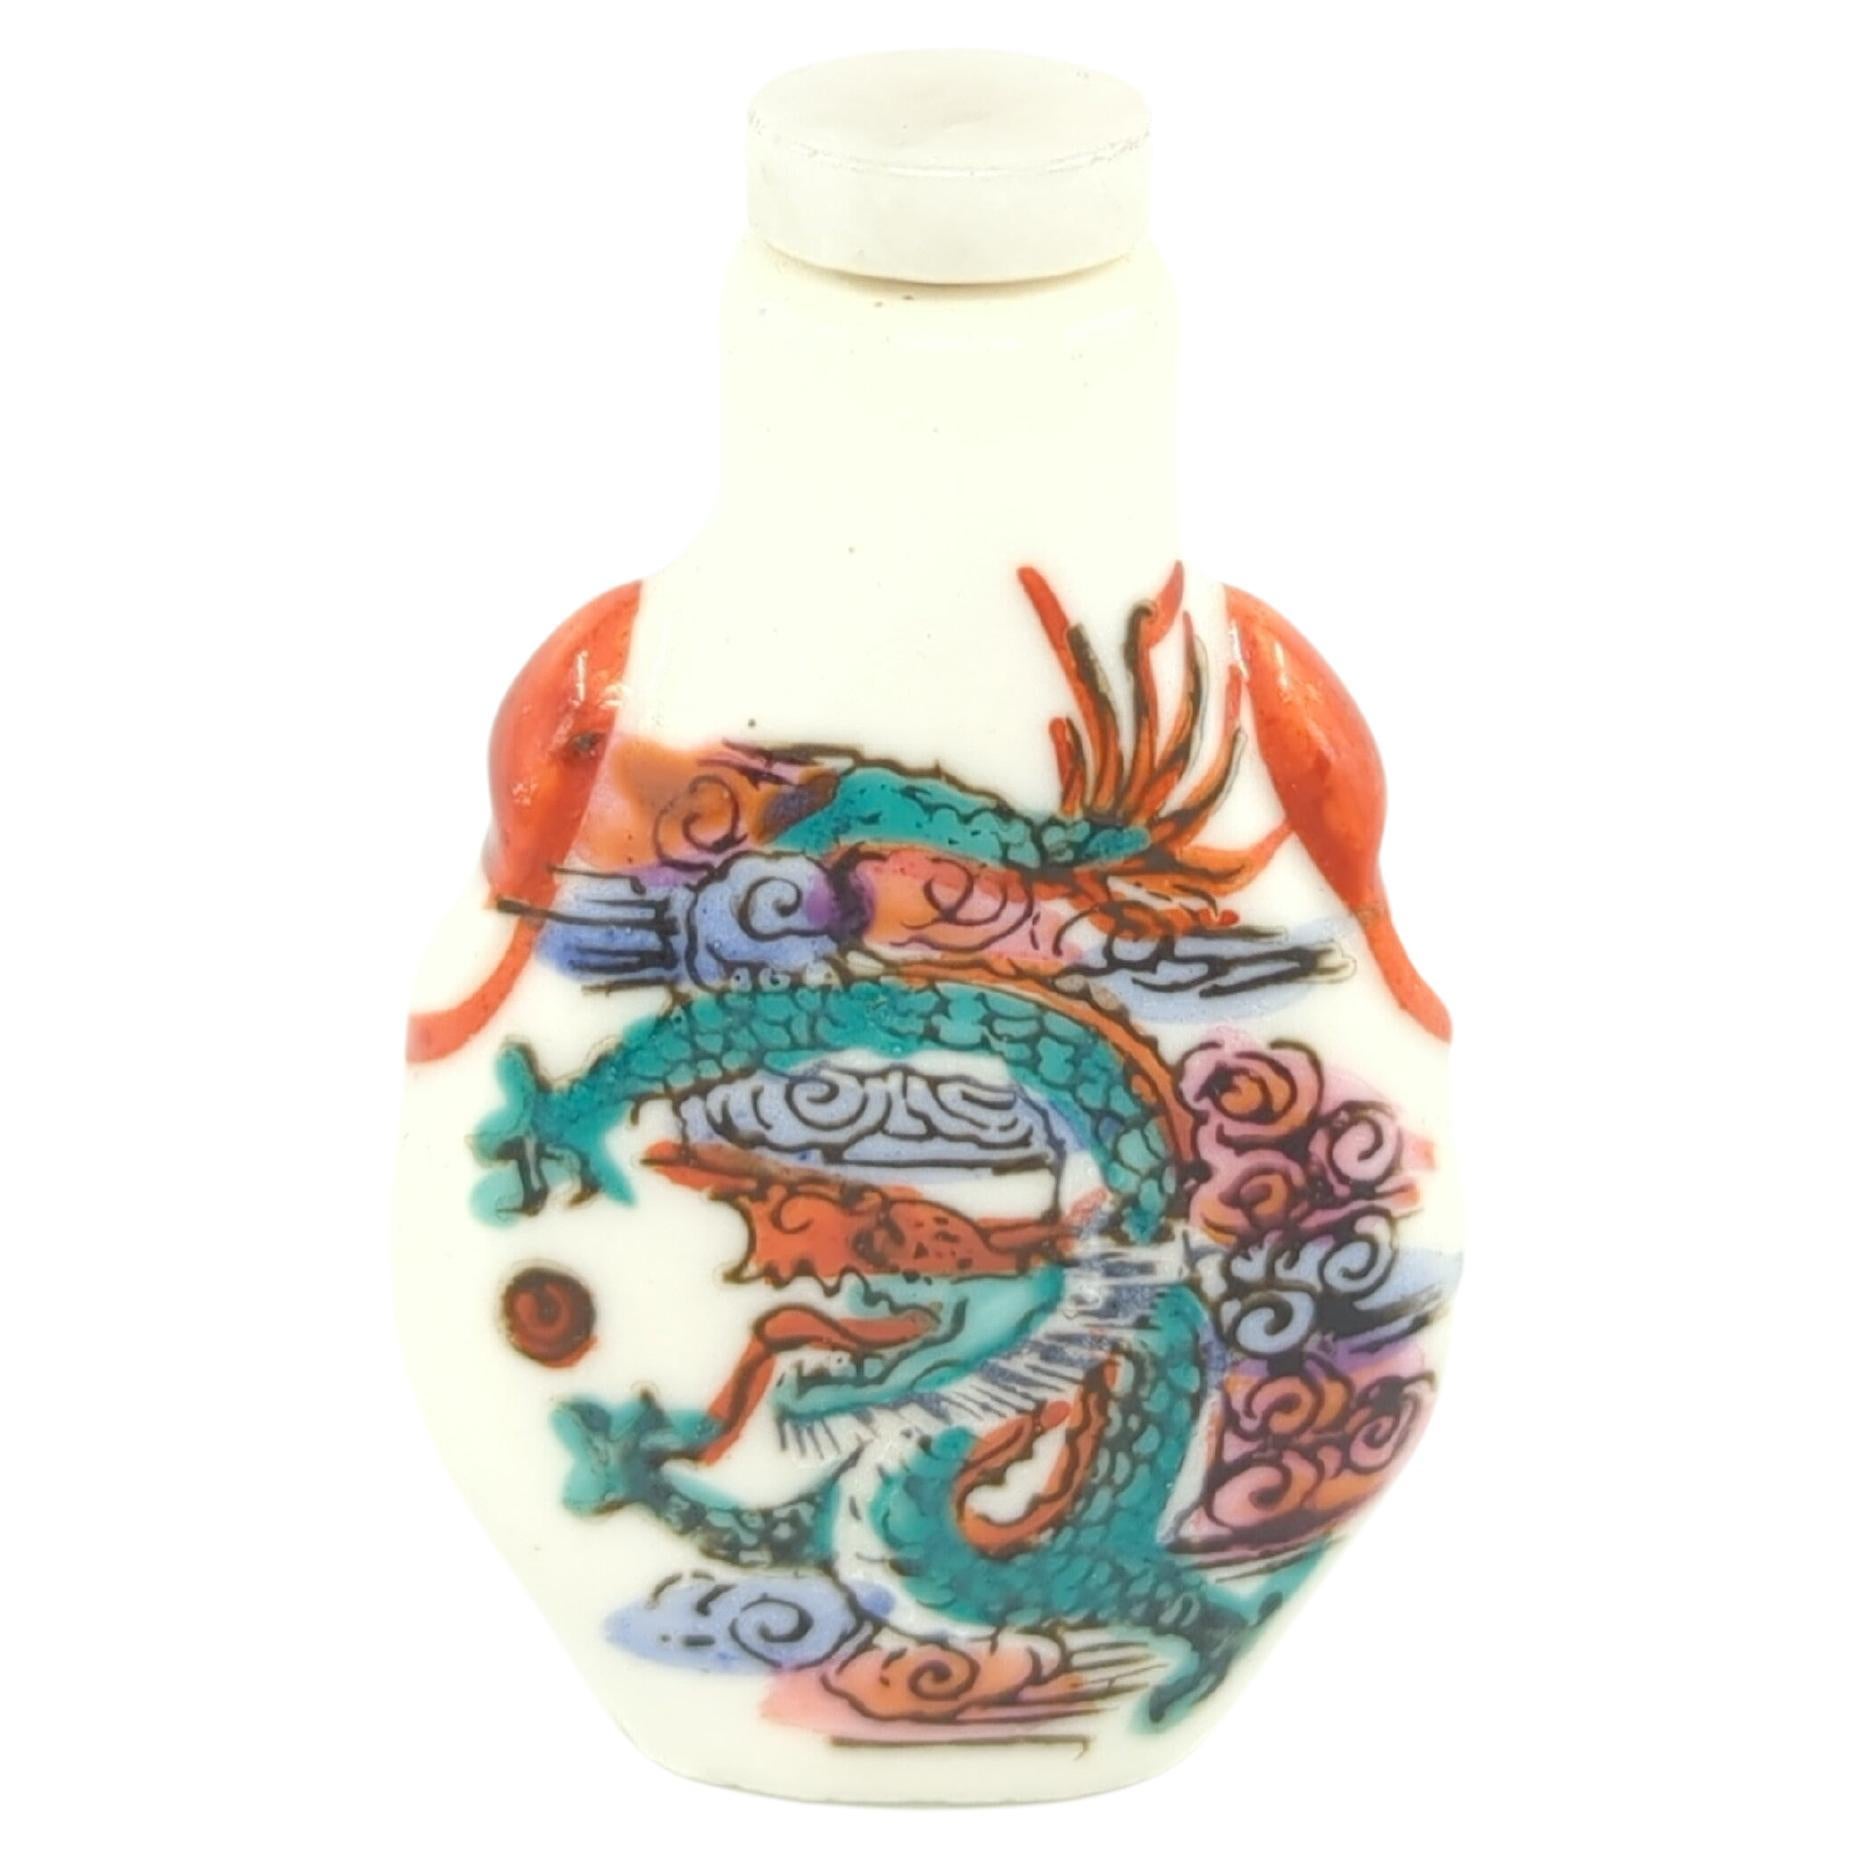 A vintage Chinese porcelain snuff bottle, decorated with a red and green dragon chasing a pearl in blue and pink clouds, with a jade stone stopper

weight: 28 Grams
circa: 20th Century